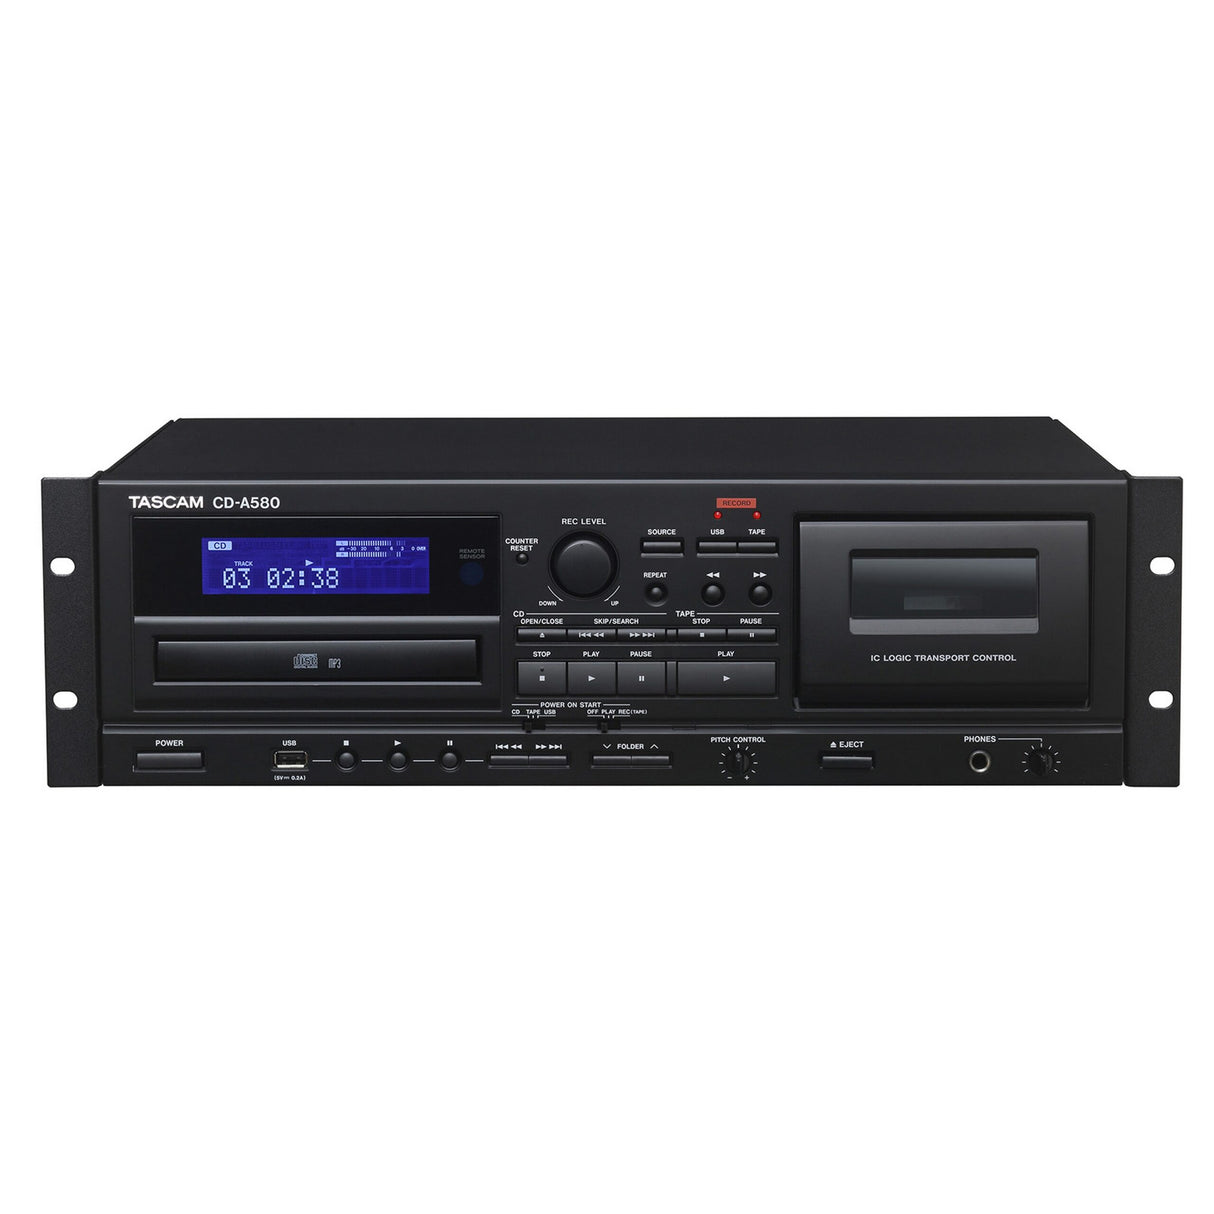 Tascam CD-A580 Cassette Recorder/CD Player/USB Flash Drive Recorder